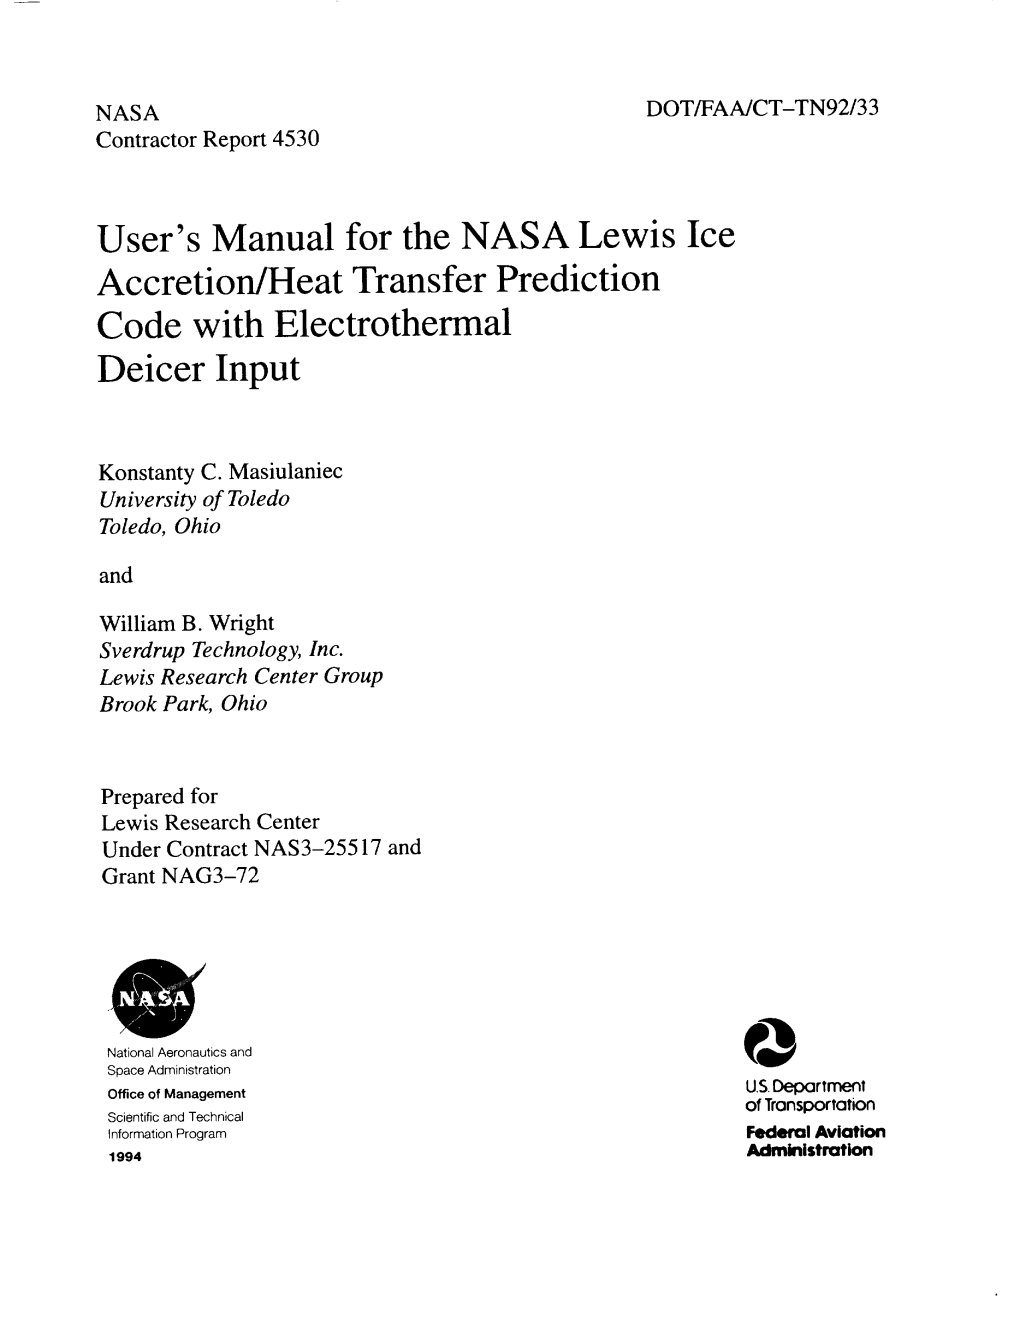 User's Manual for the NASA Lewis Ice Accretion/Heat Transfer Prediction Code with Electrothermal Deicer Input